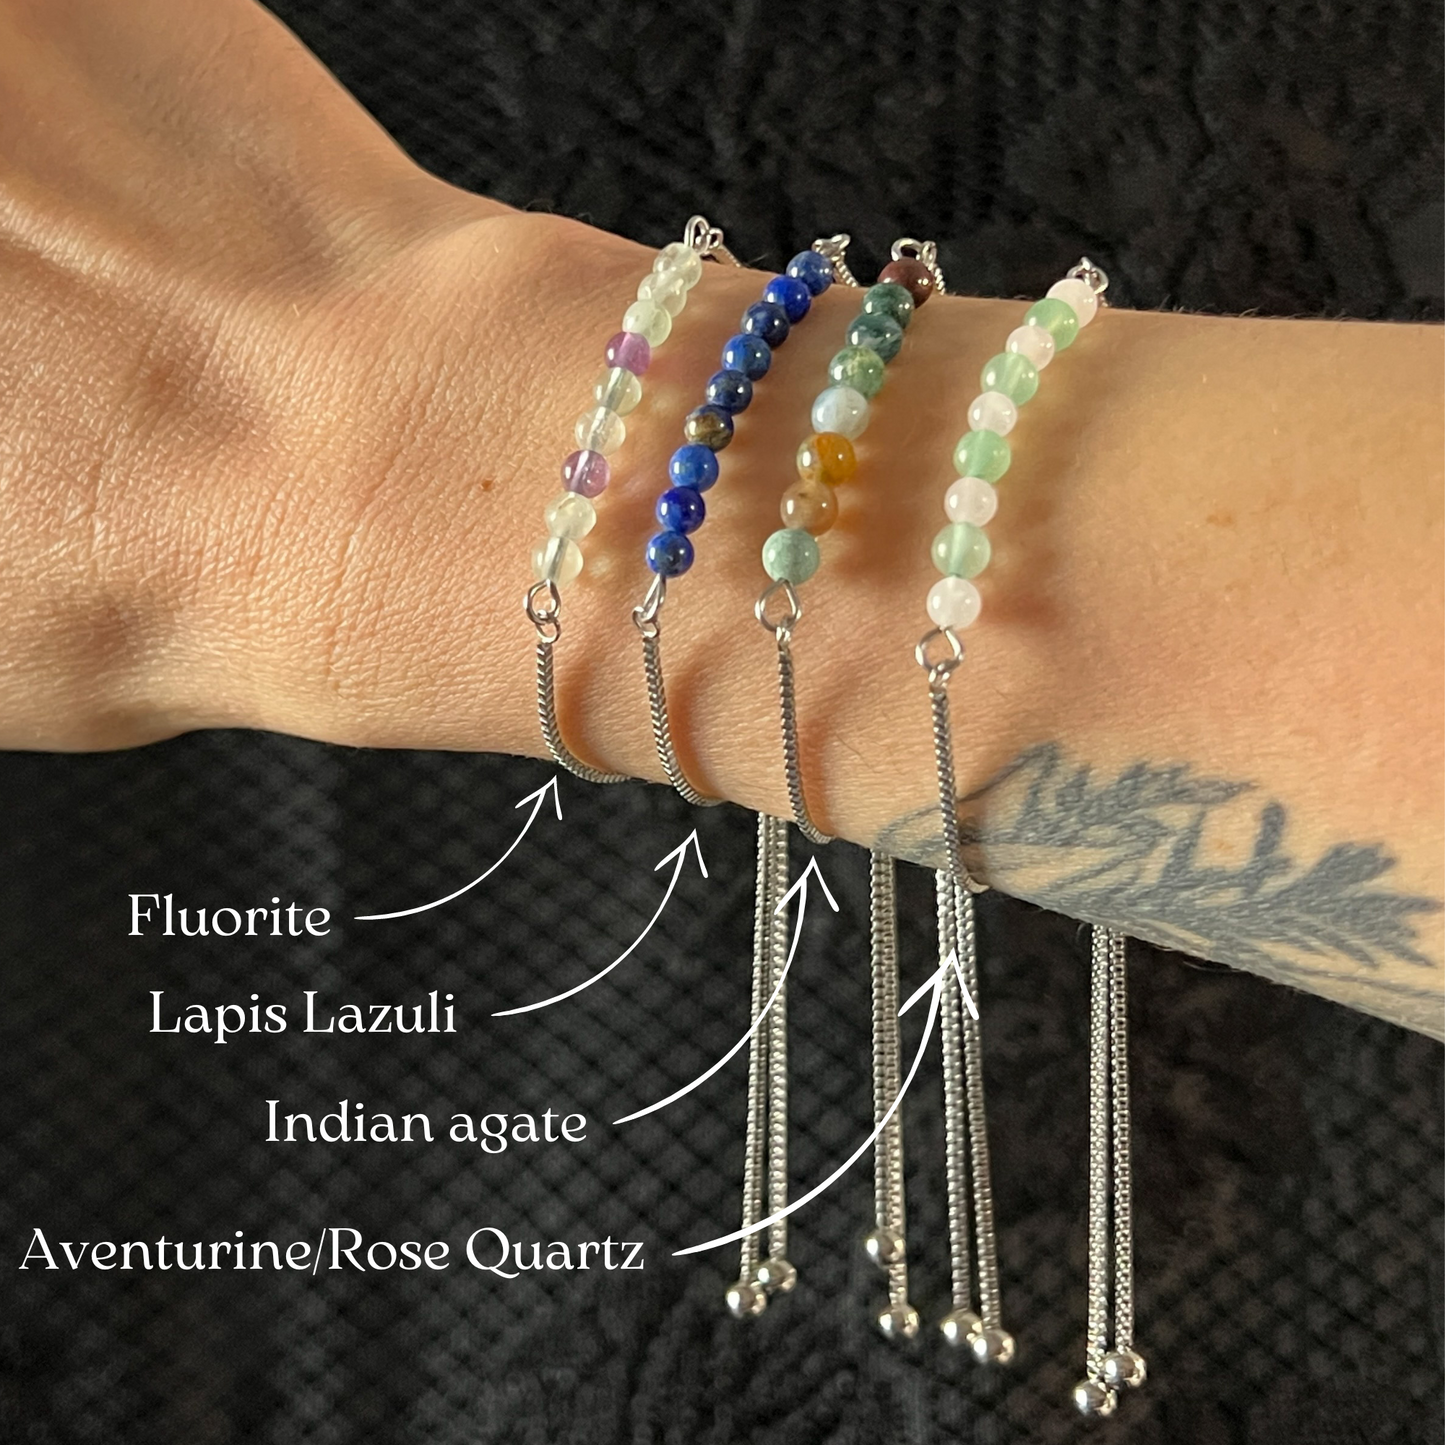 Slider bracelet, made of stainless steel and fluorite, lapis lazuli, indian agate, or aventurine and rose quartz Baguette Magick